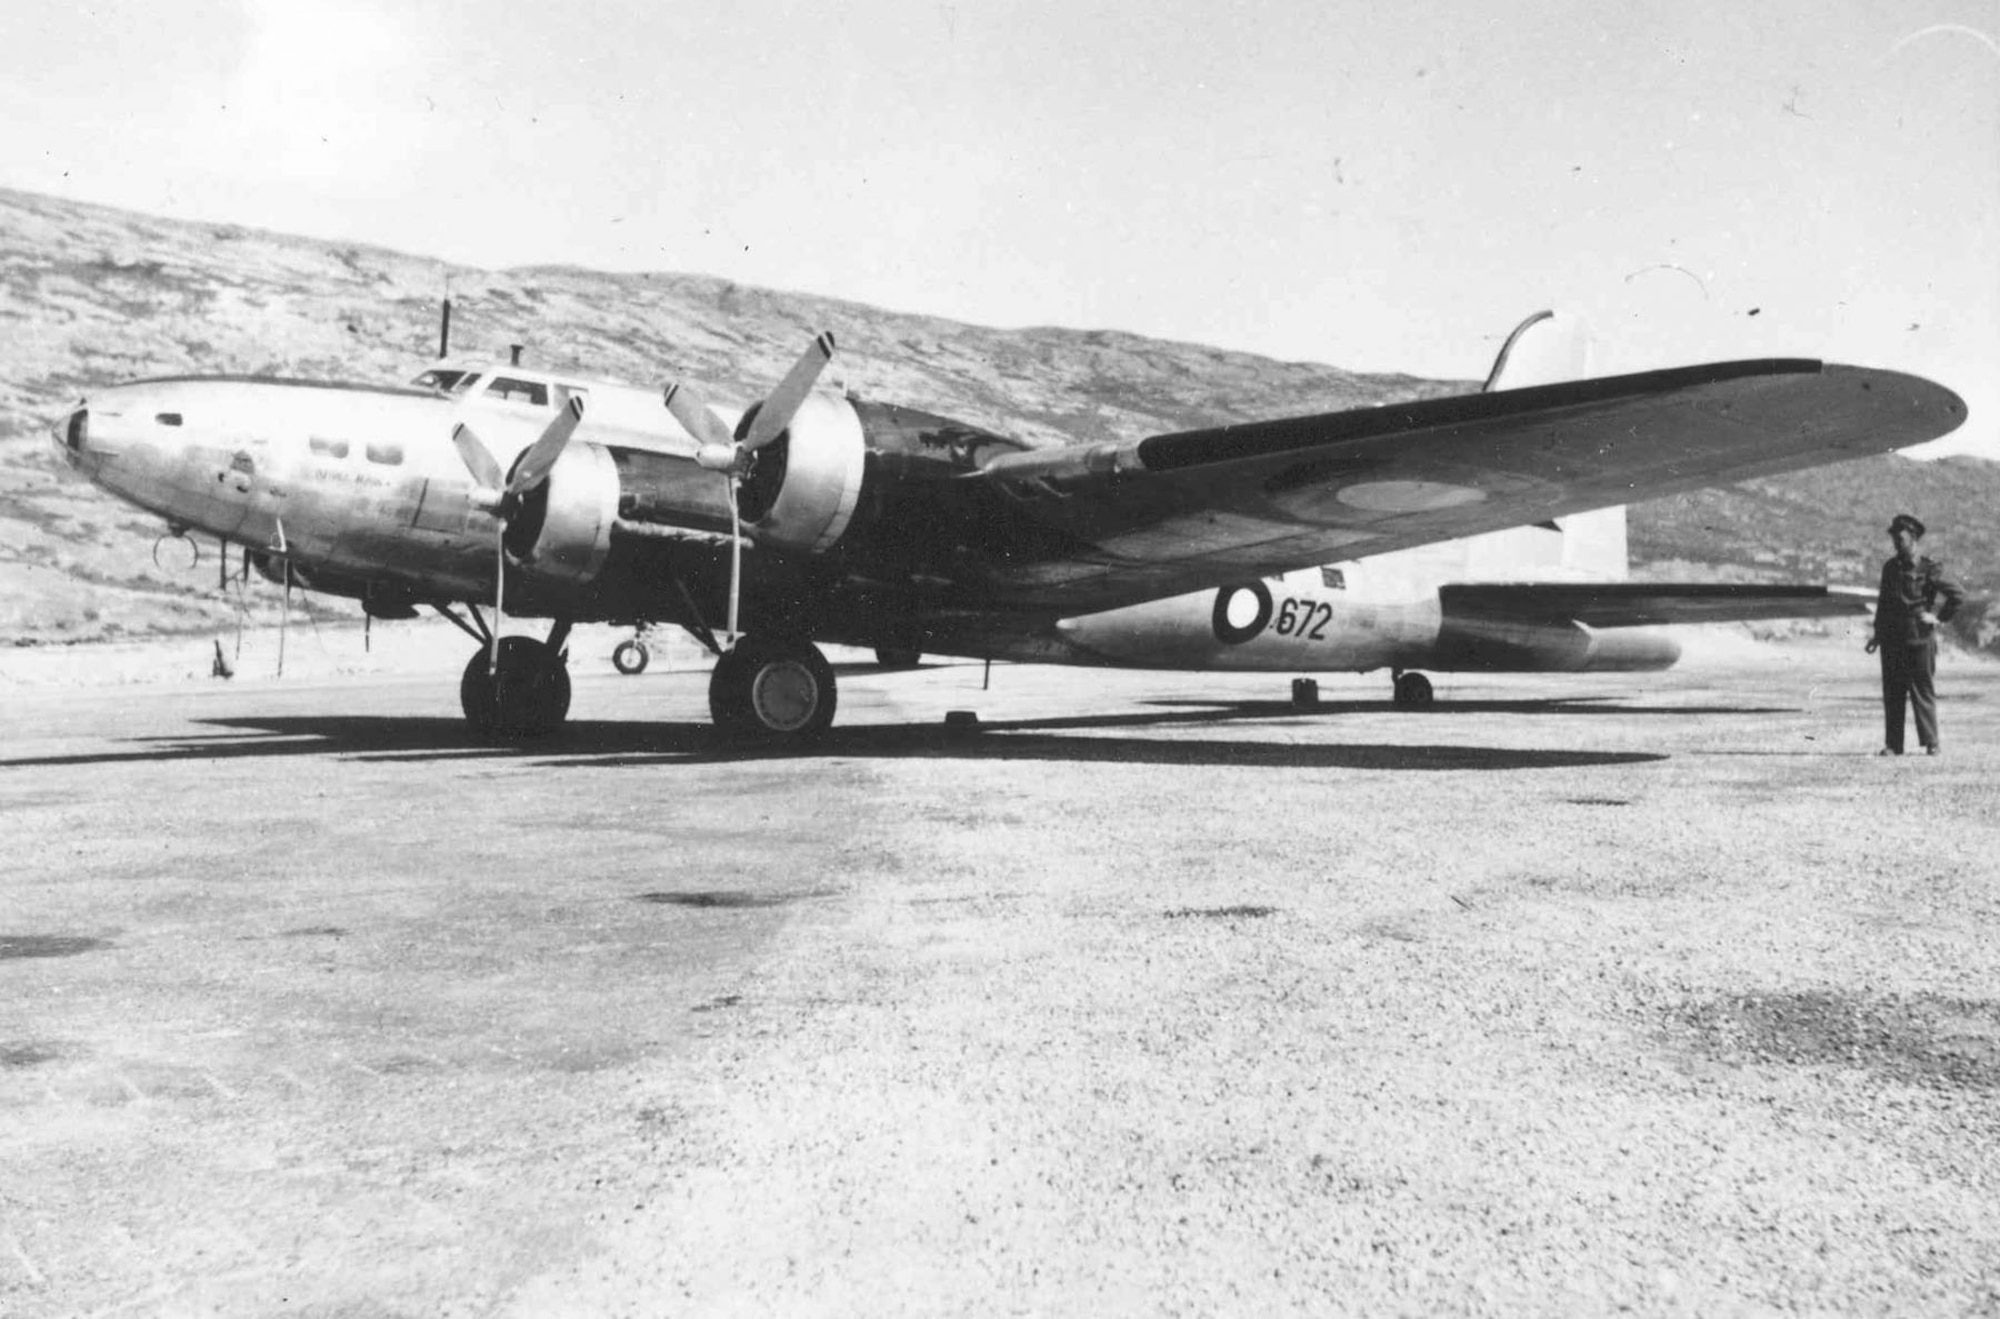 Boeing B-17G "Shoo Shoo Shoo Baby."  The aircraft carried the name "Store Bjorn" while in service with Denmark. (U.S. Air Force photo)